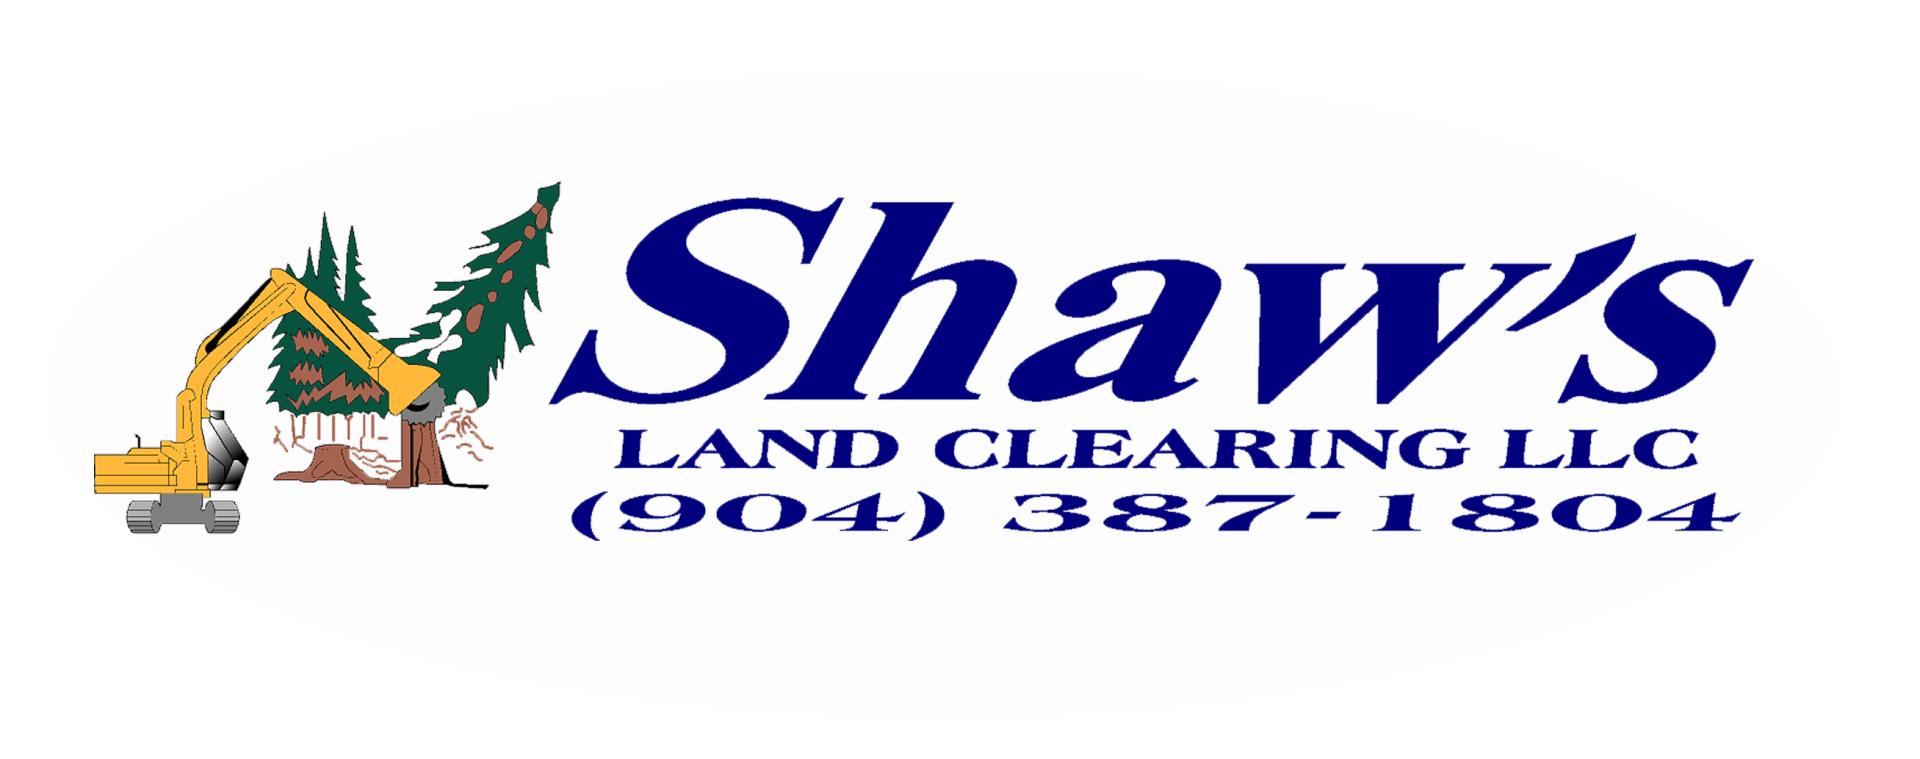 Shaw’s Land Clearing, LLC